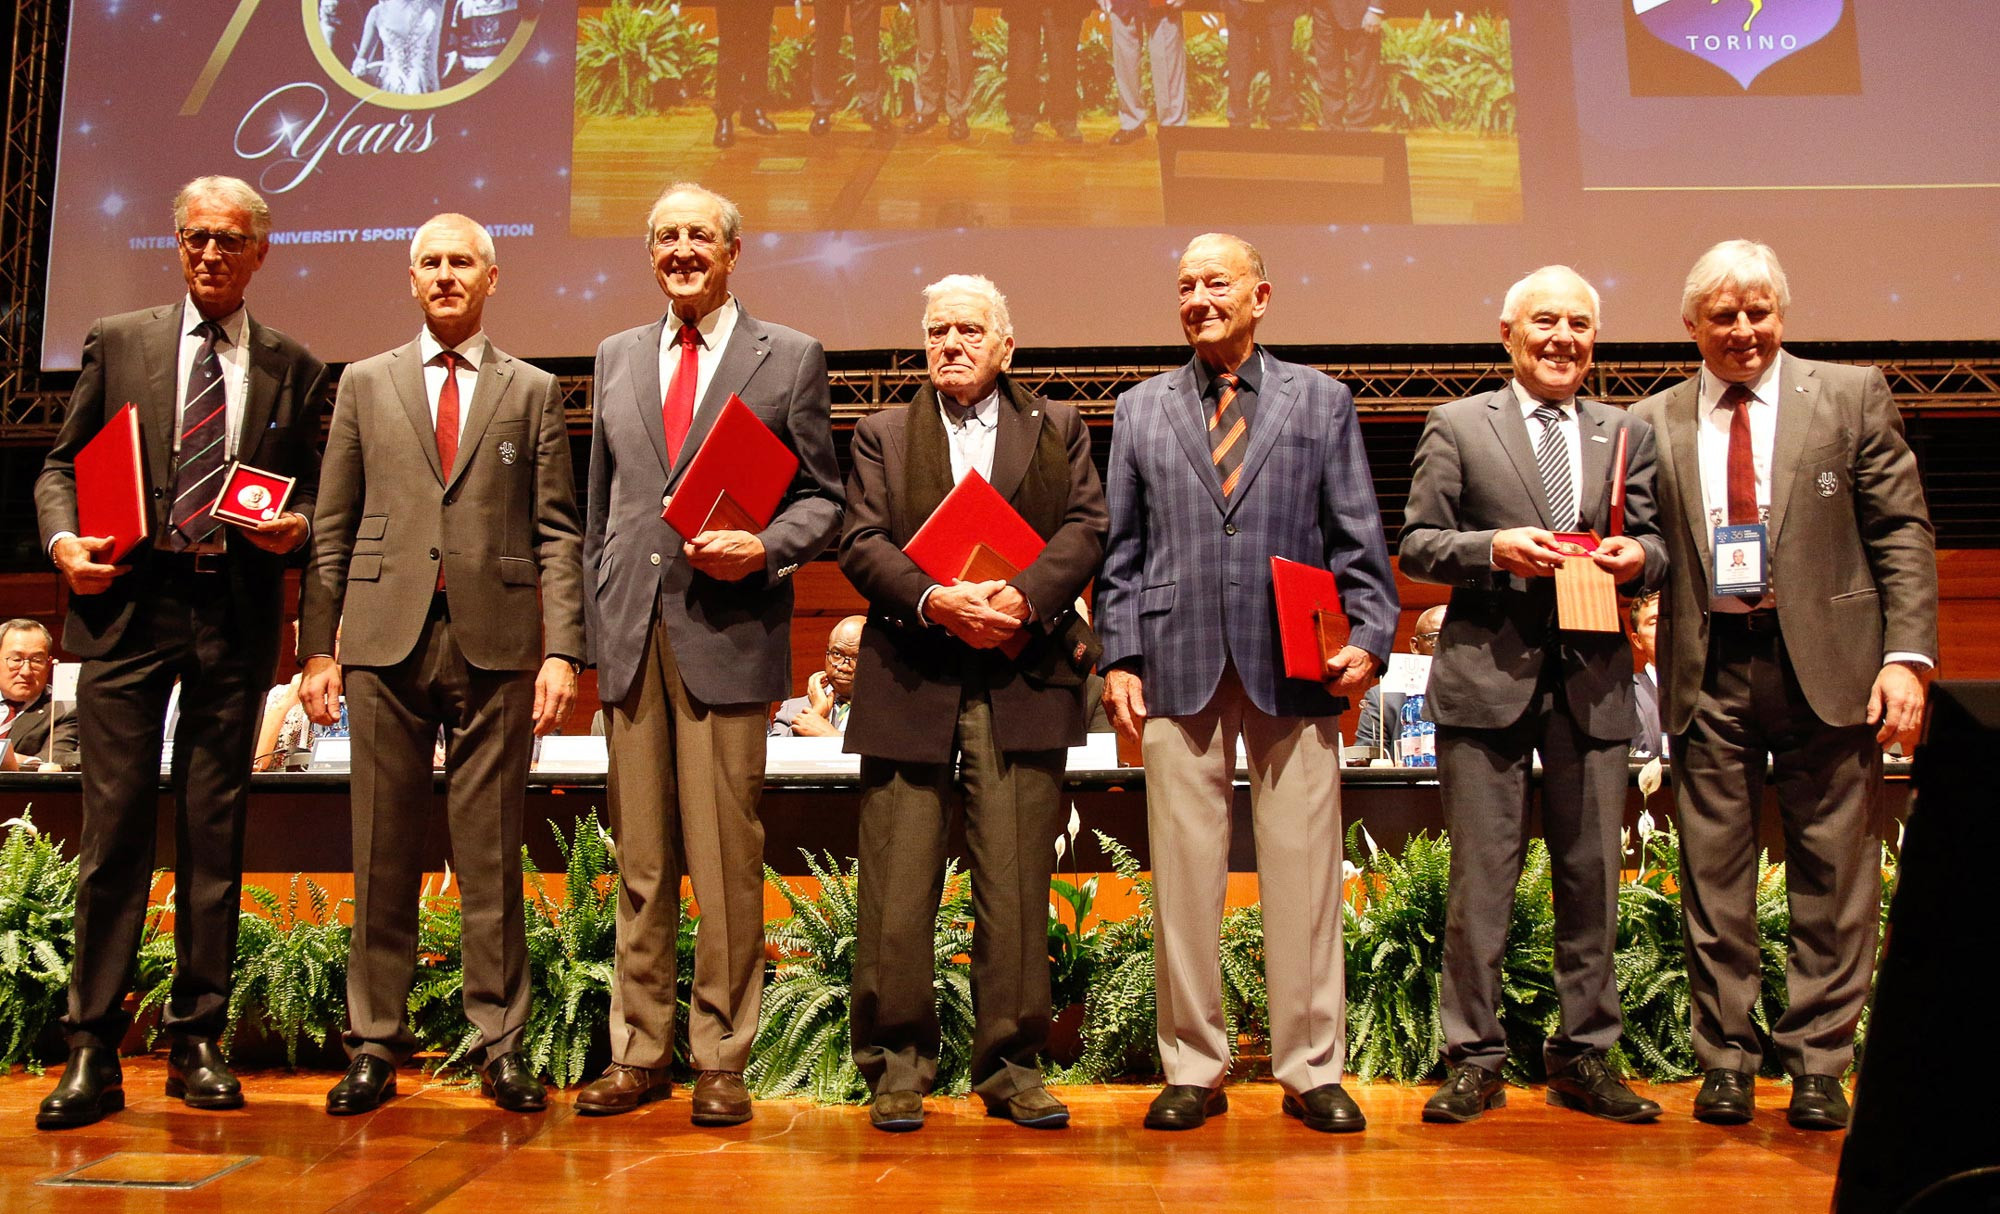 The inaugural winners of the Primo Nebiolo medals accept the congratulations of the General Assembly ©FISU